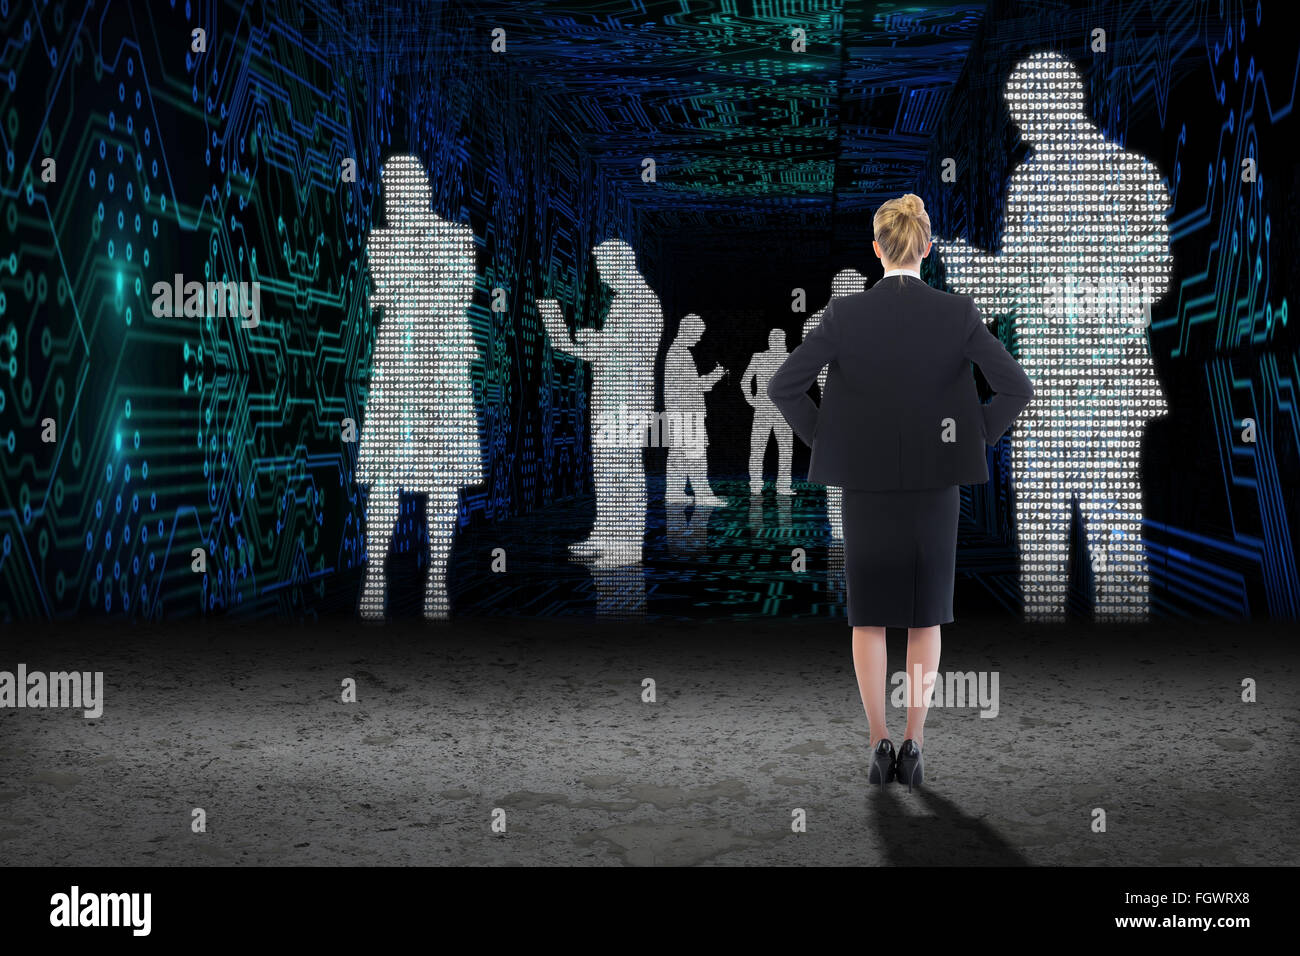 Composite image of businesswoman standing with hands on hips Stock Photo